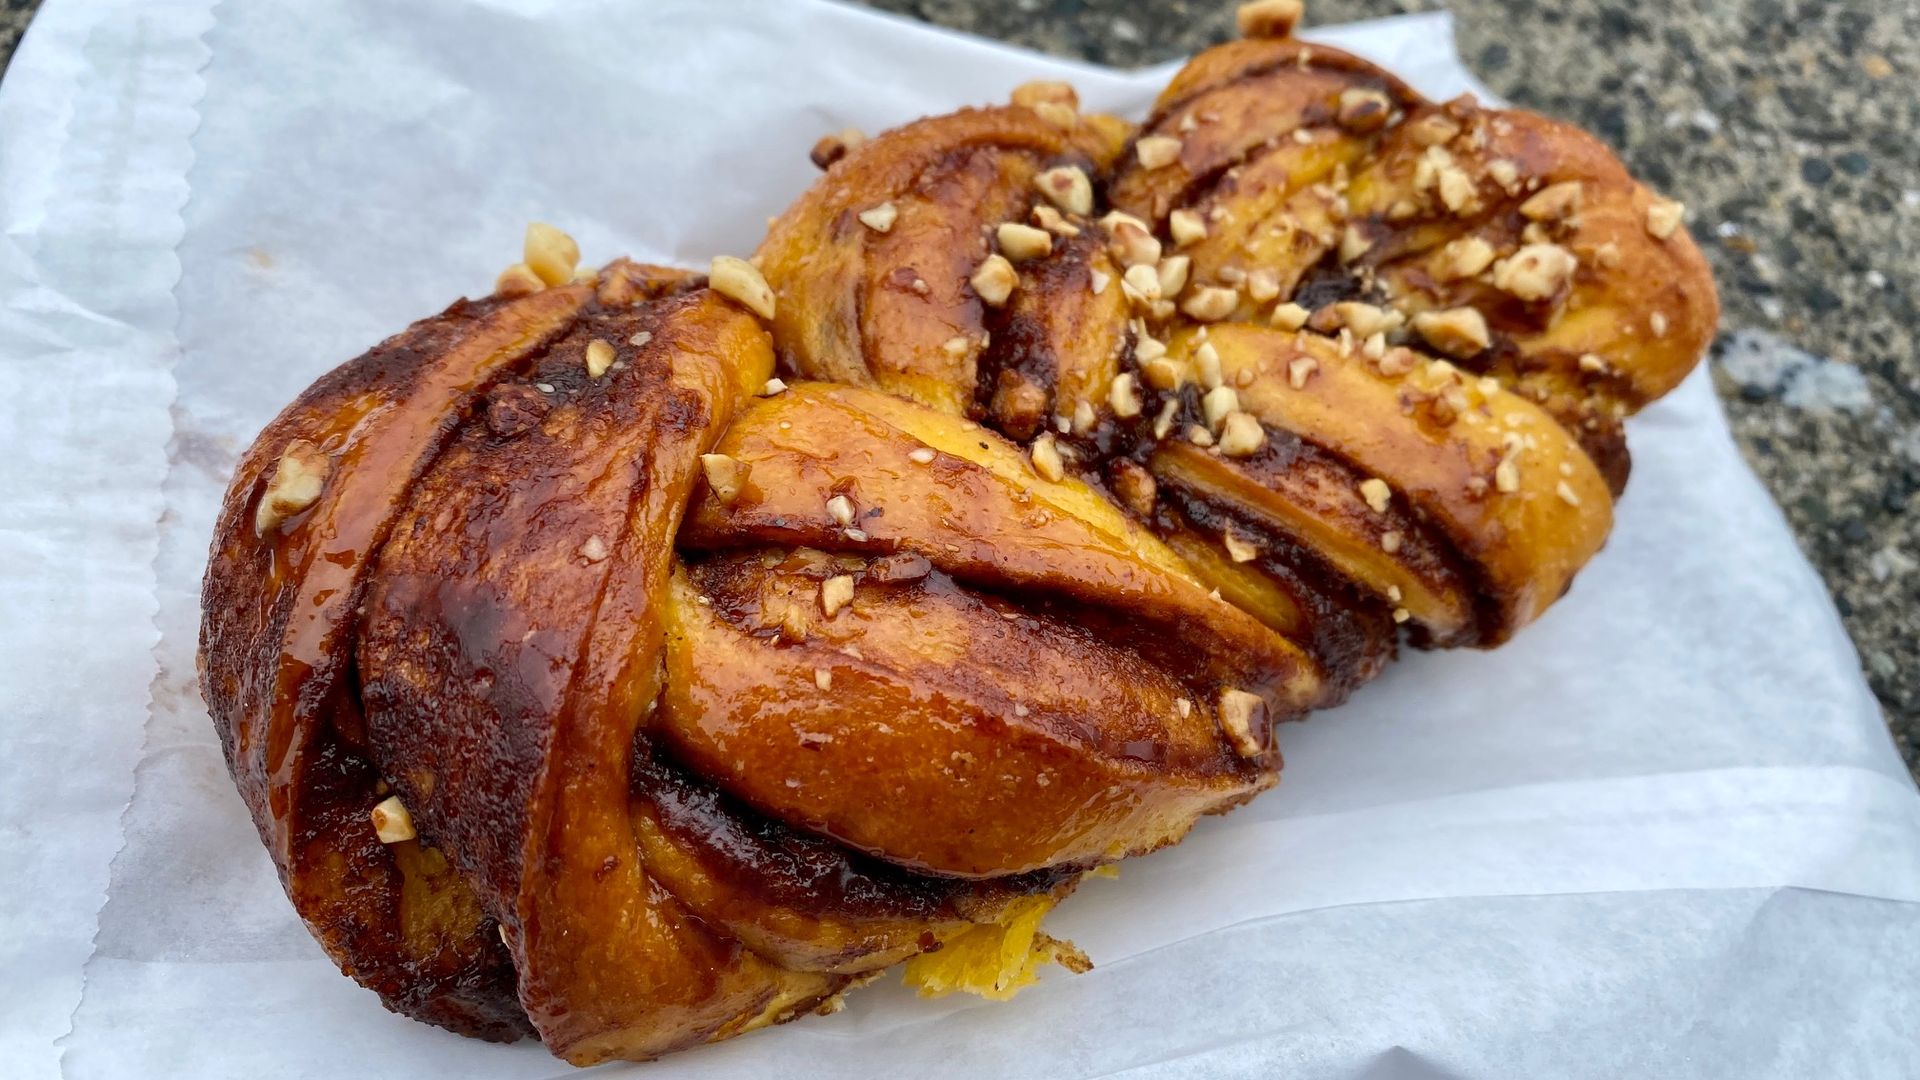 A braided baked pastry with nuts on top and chocolate and cinnamon woven throughout.